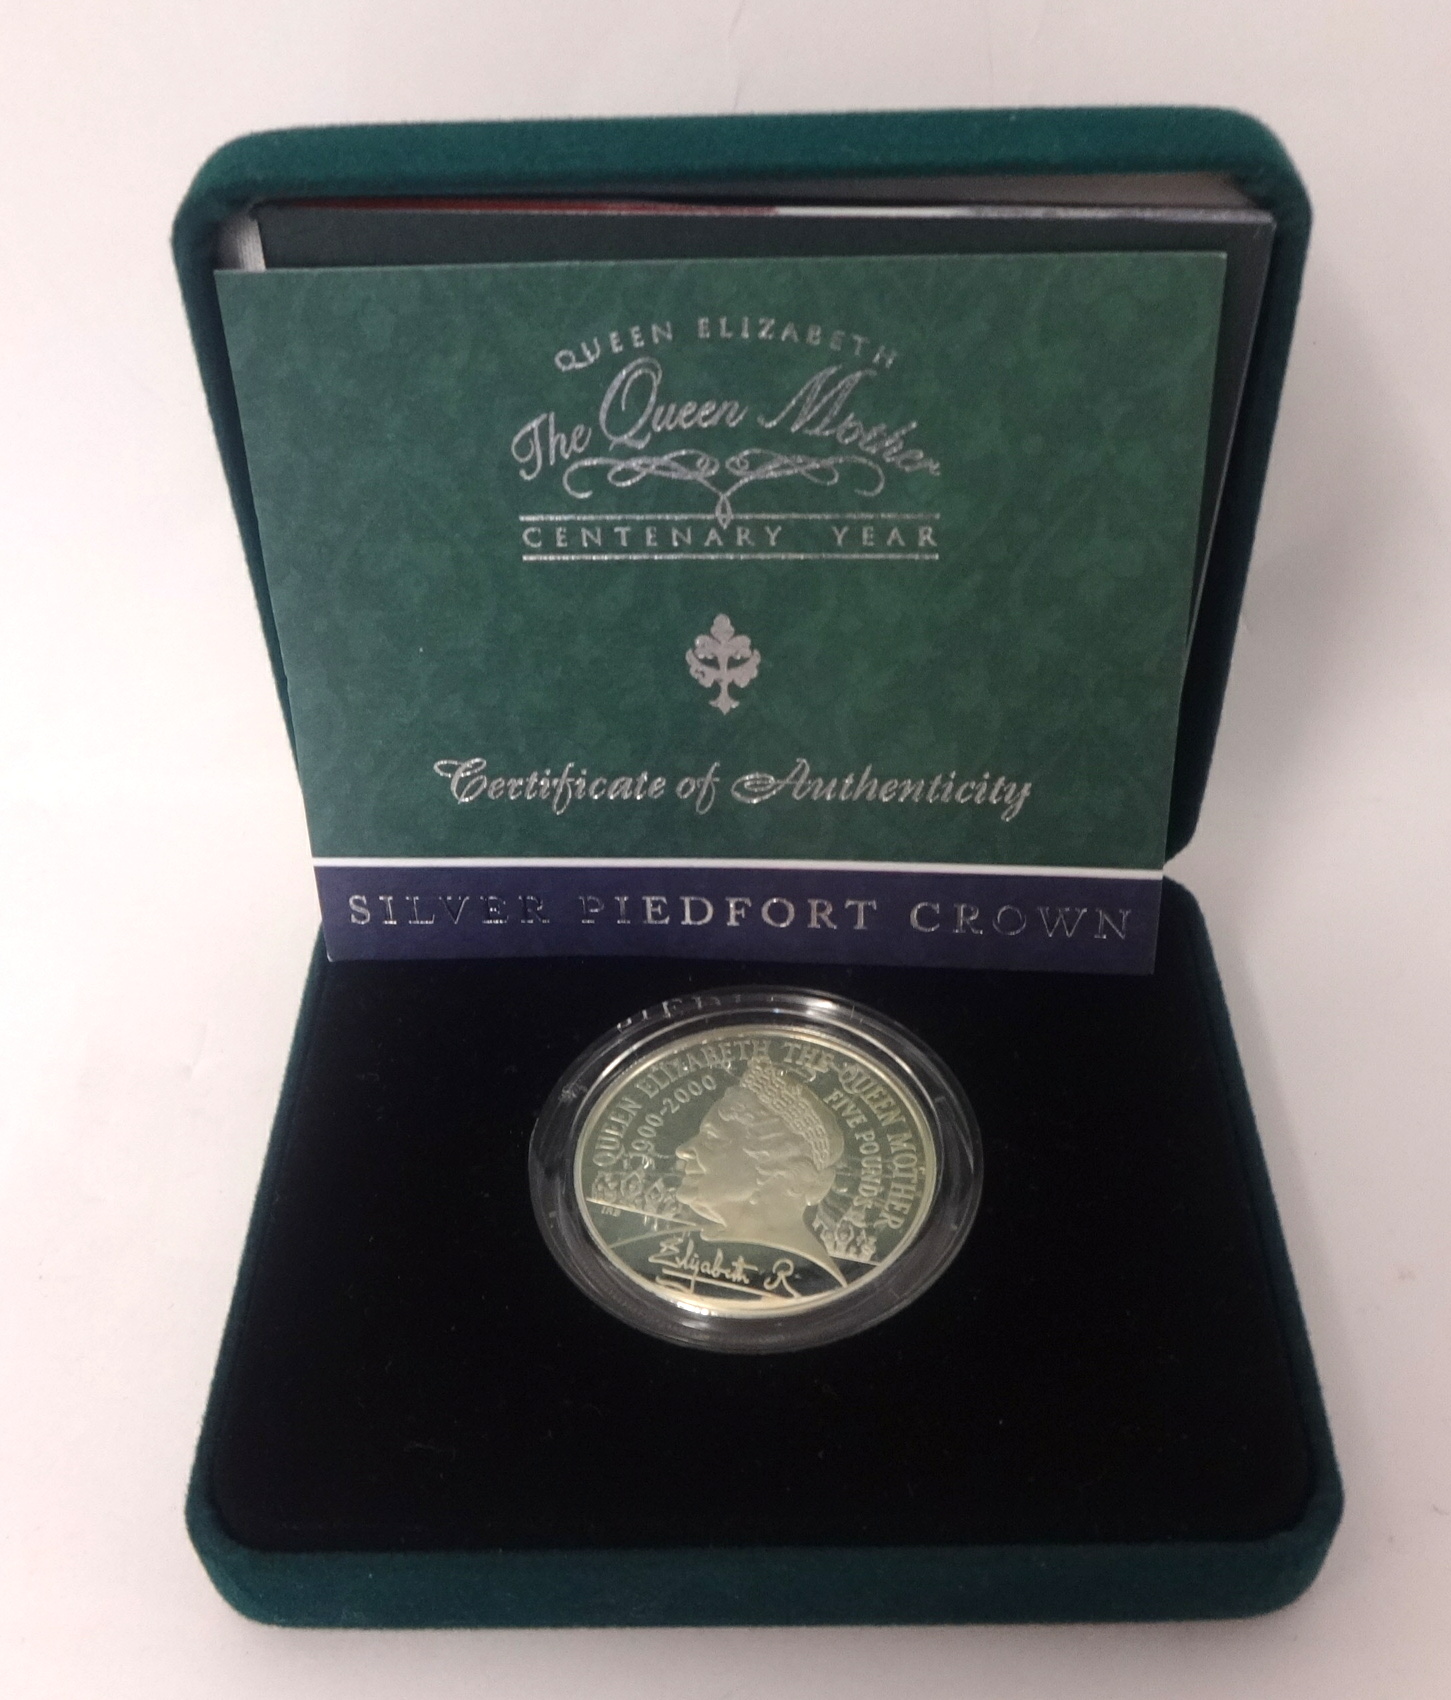 Royal Mint UK The Queen Mother Centenary Year, silver Piedfort crown, 56.56g, cased